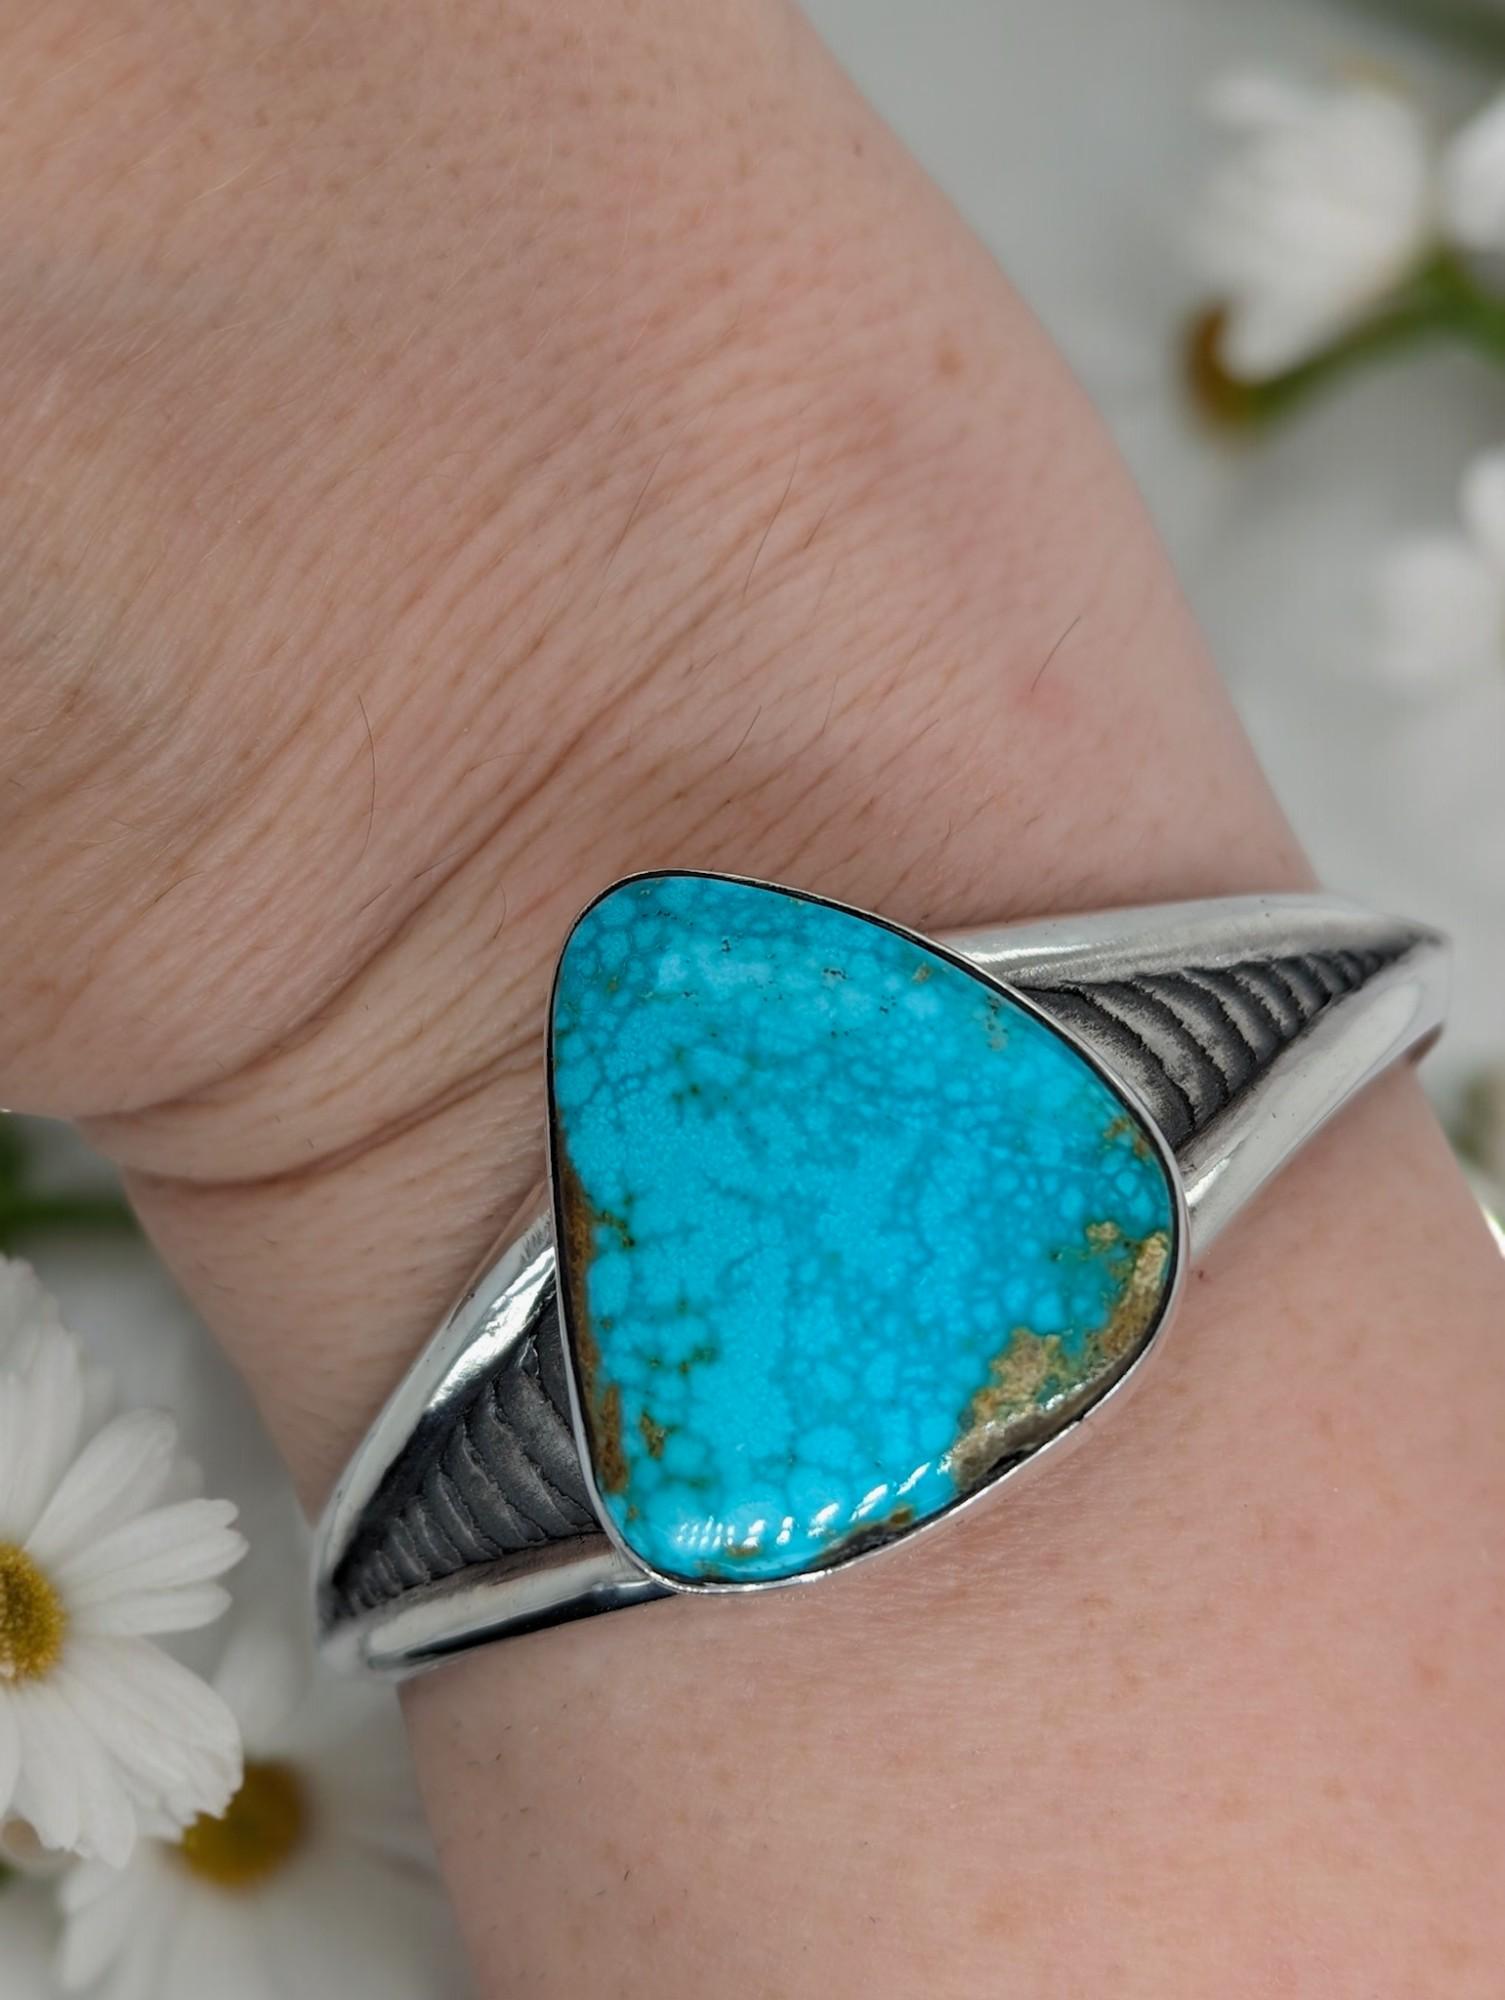 Striking Kingman Turquoise Cuff: Cuttle Bone Texture (Sterling Silver) In New Condition For Sale In Greeneville, TN